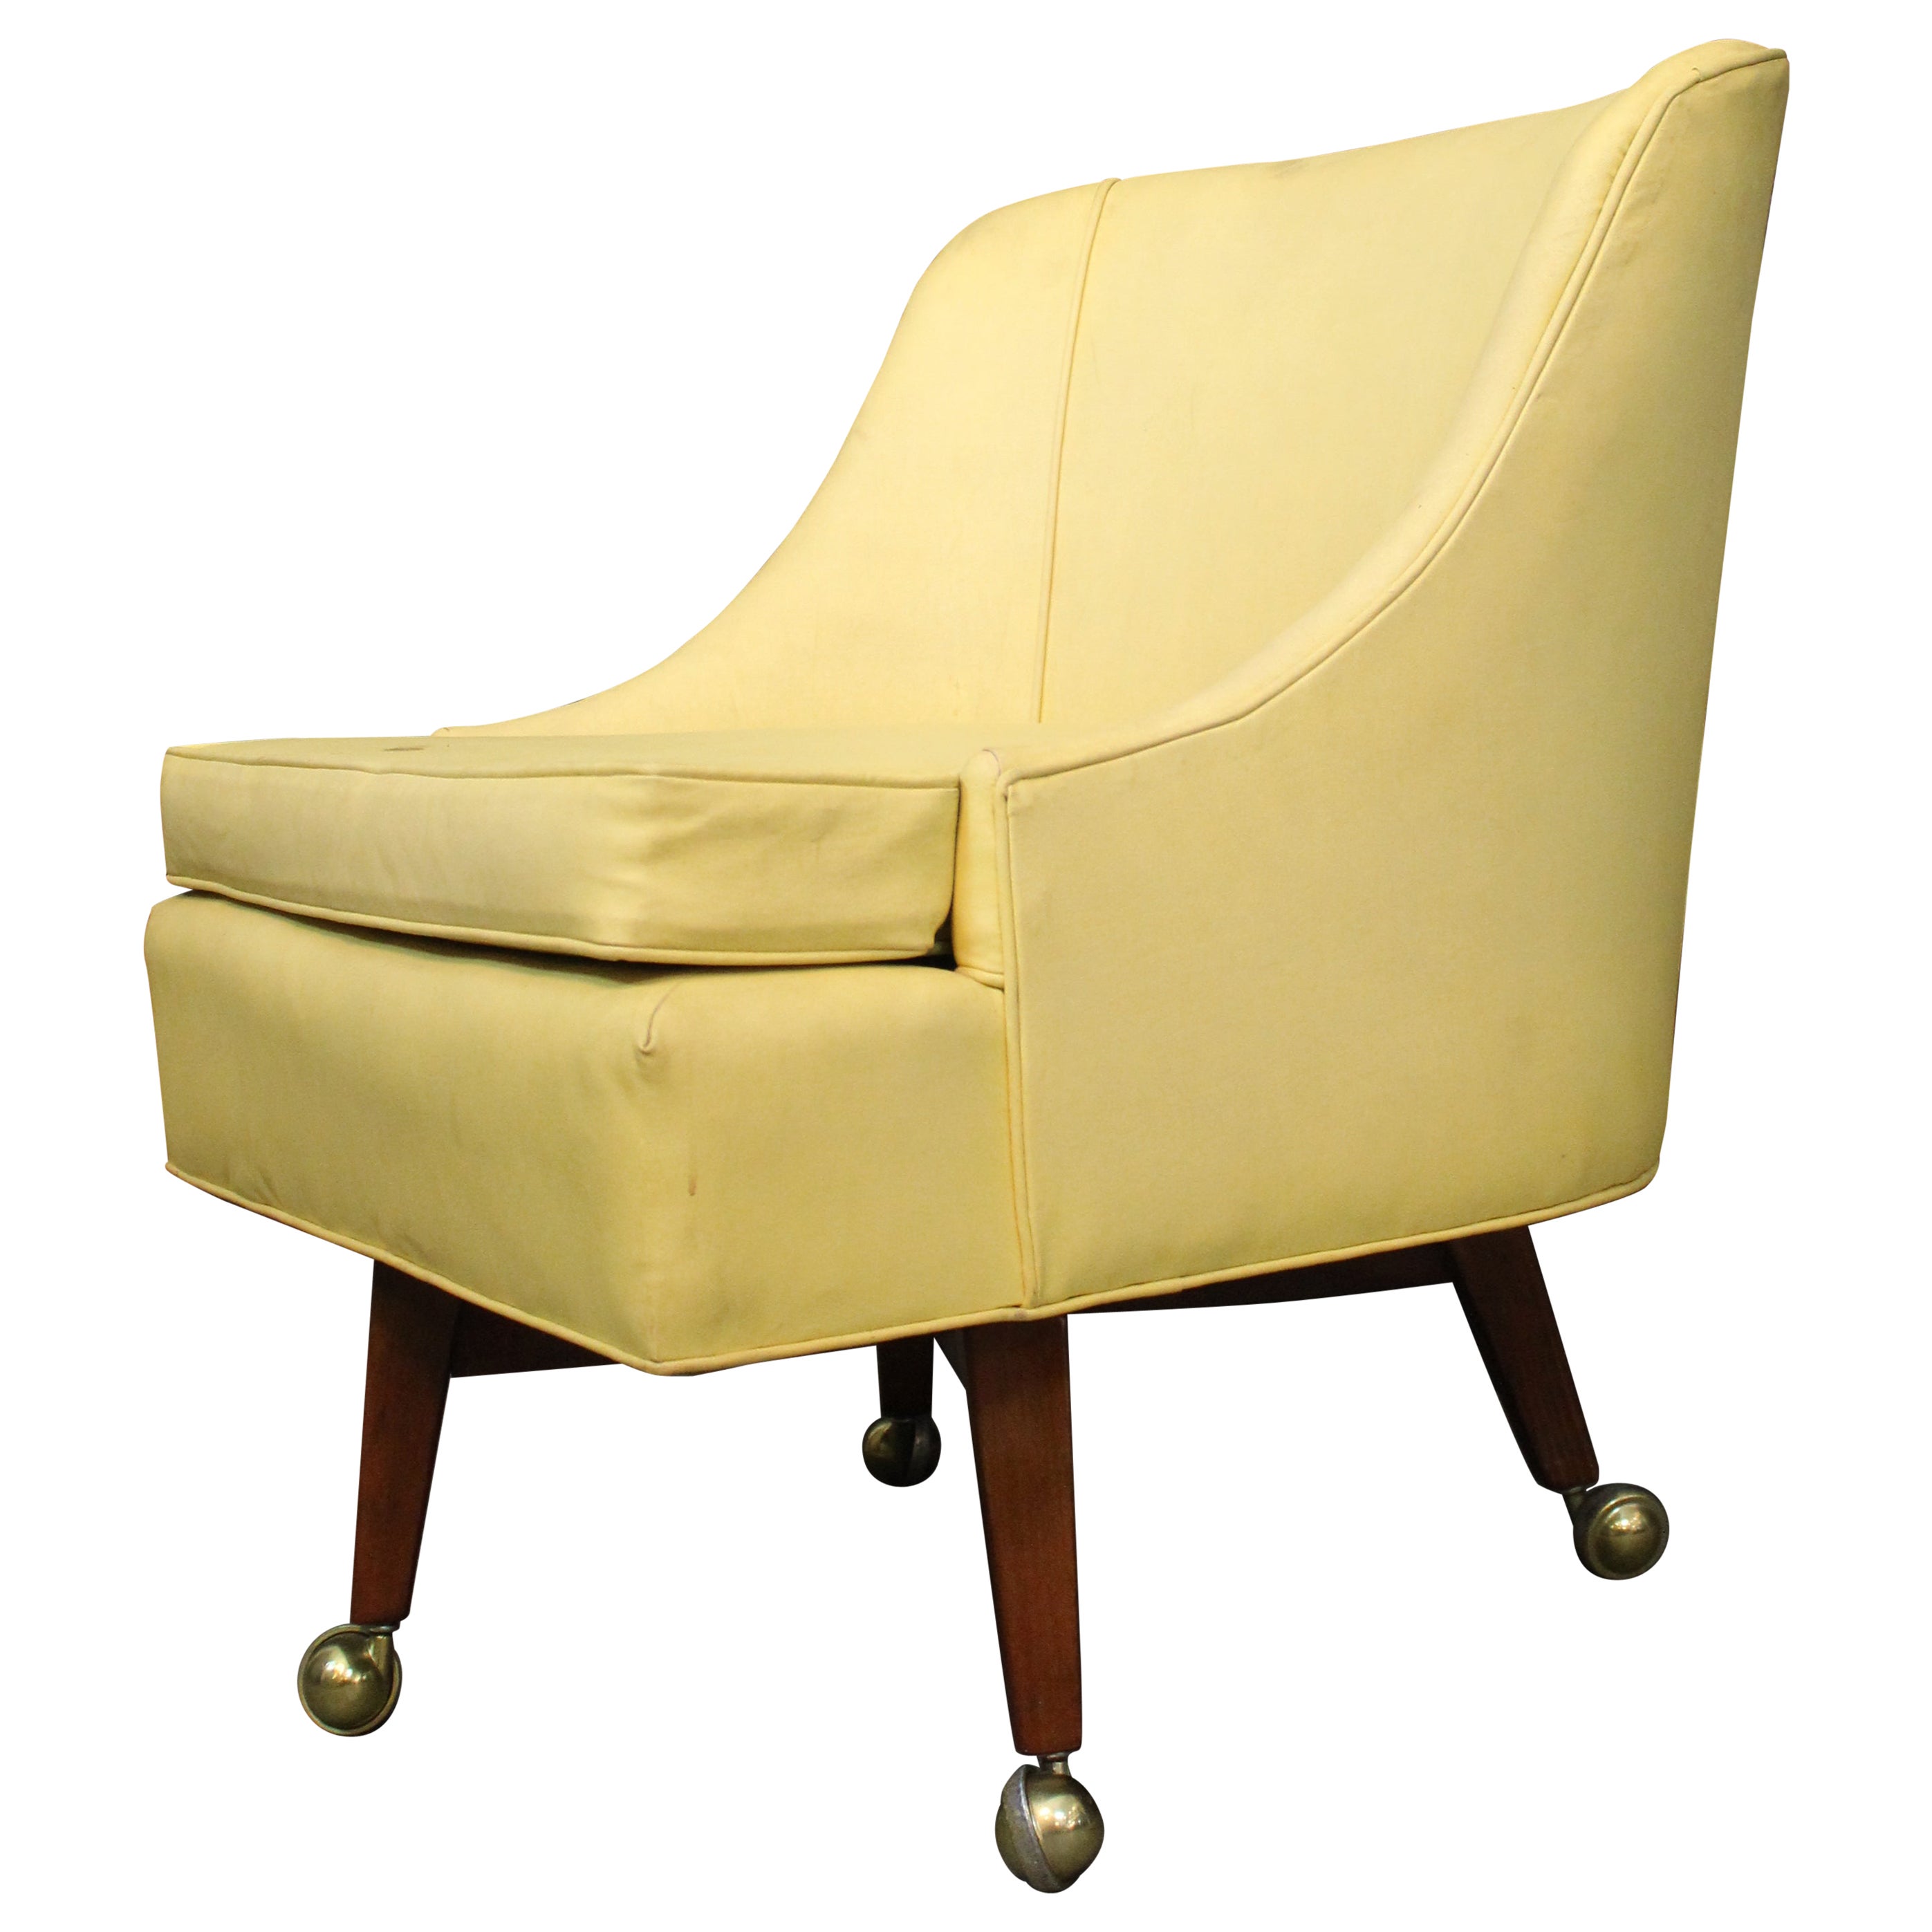 Indianapolis Chair Company Rolling Mustard Chair For Sale